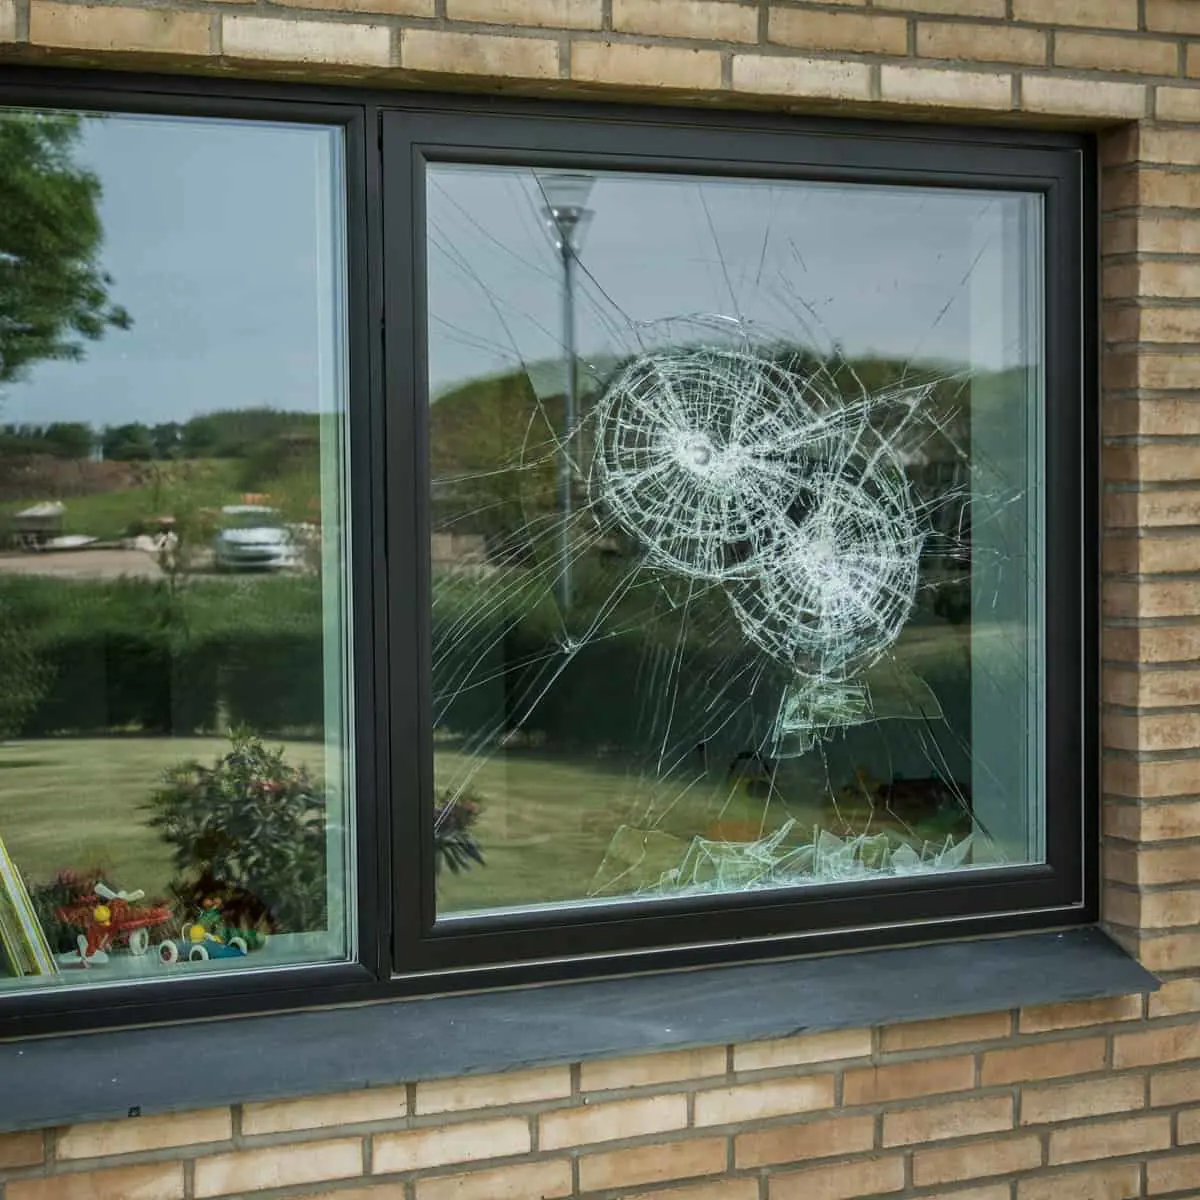 Laminated glass to deter break-ins